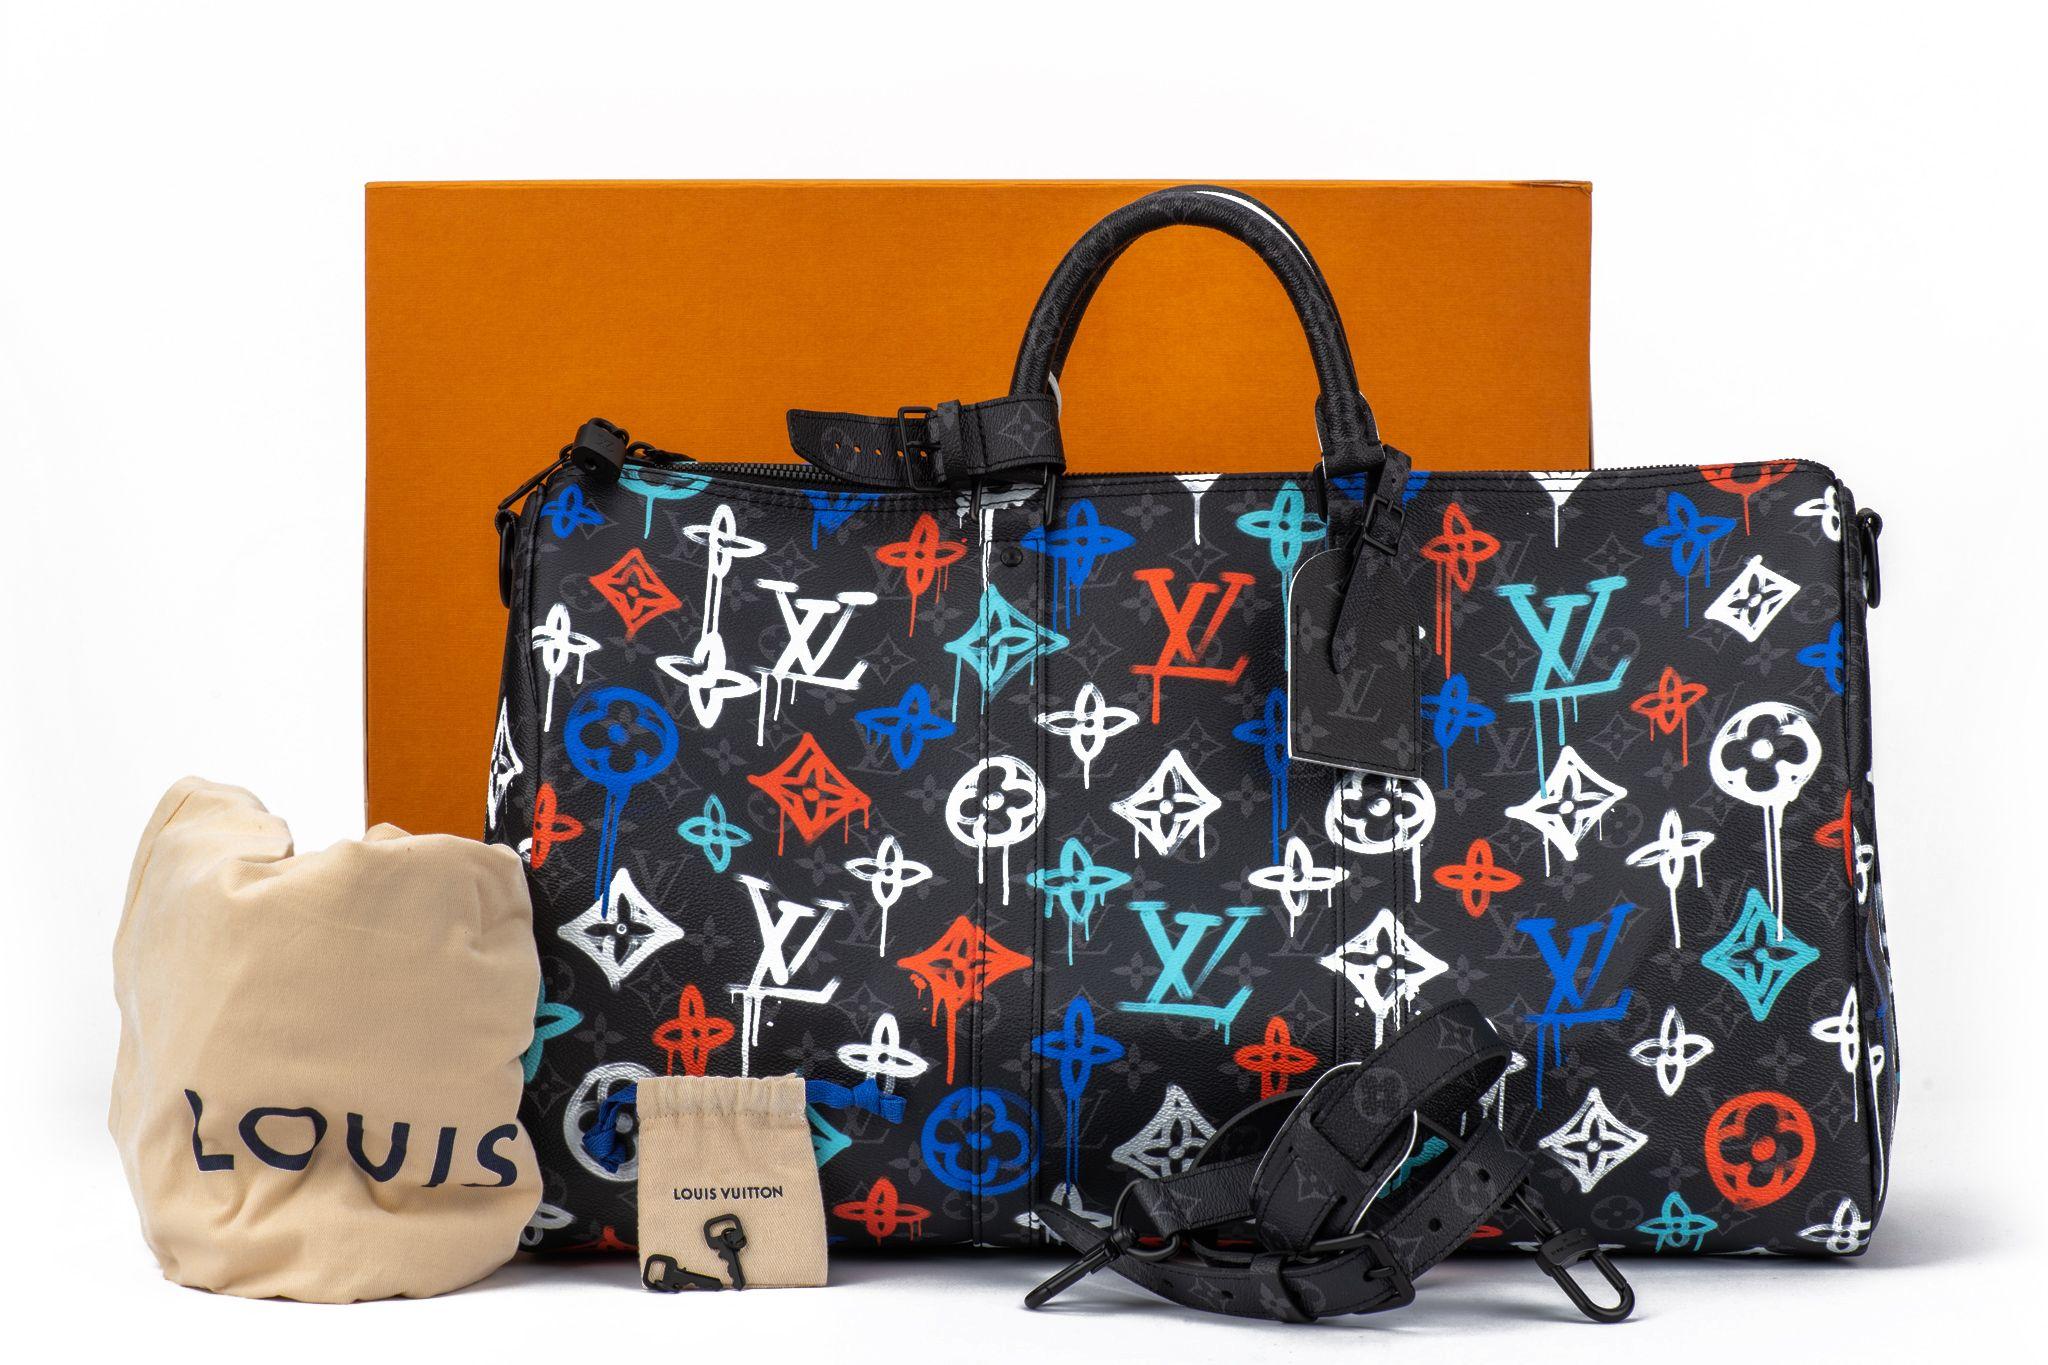 Louis Vuitton Keepall 50 2WAY New in Original Box For Sale 5